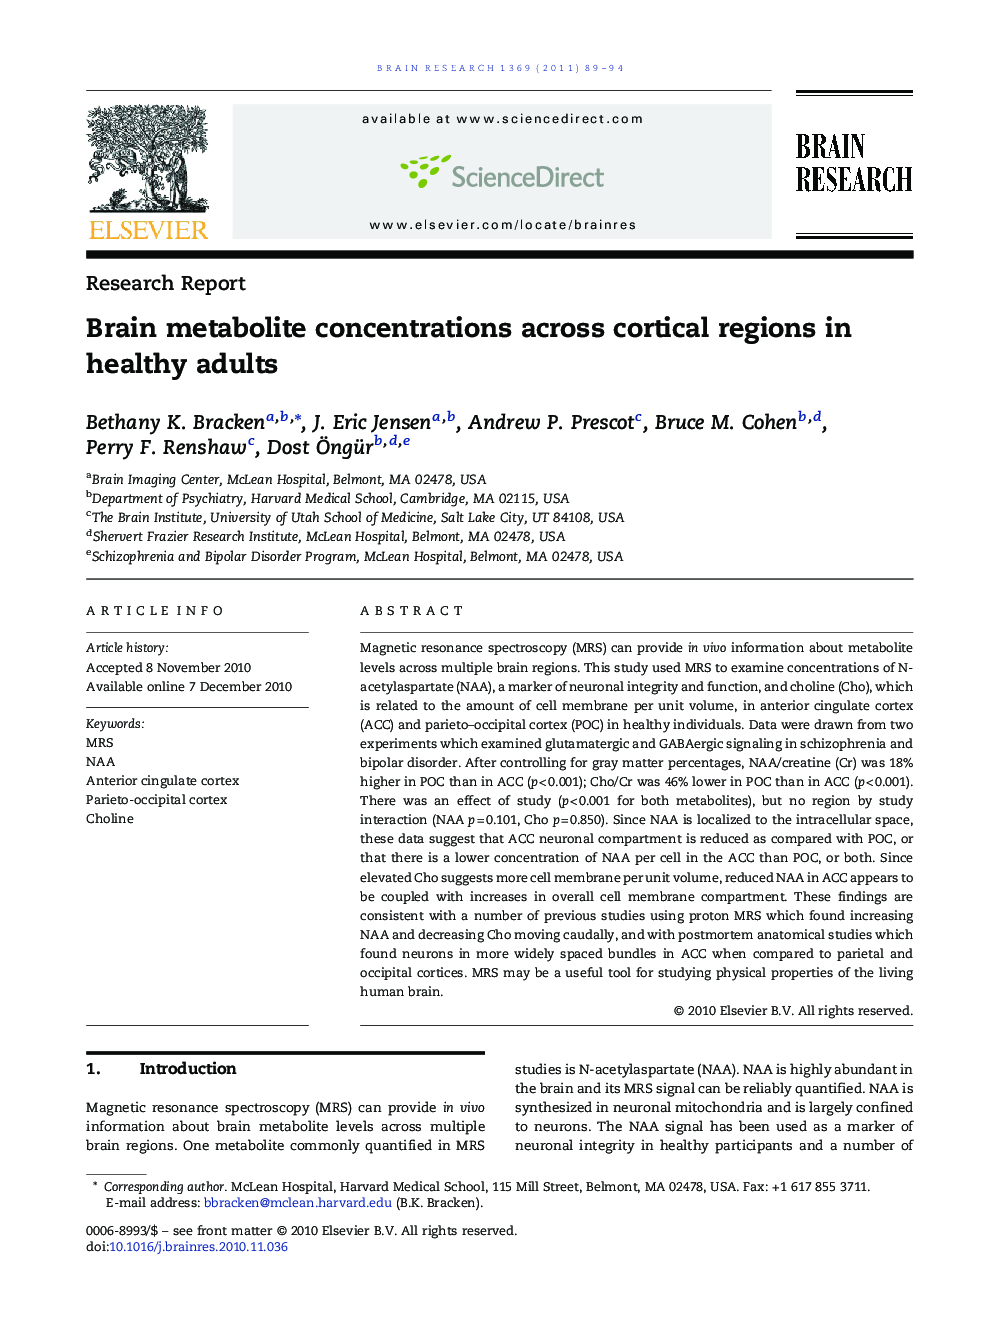 Research ReportBrain metabolite concentrations across cortical regions in healthy adults